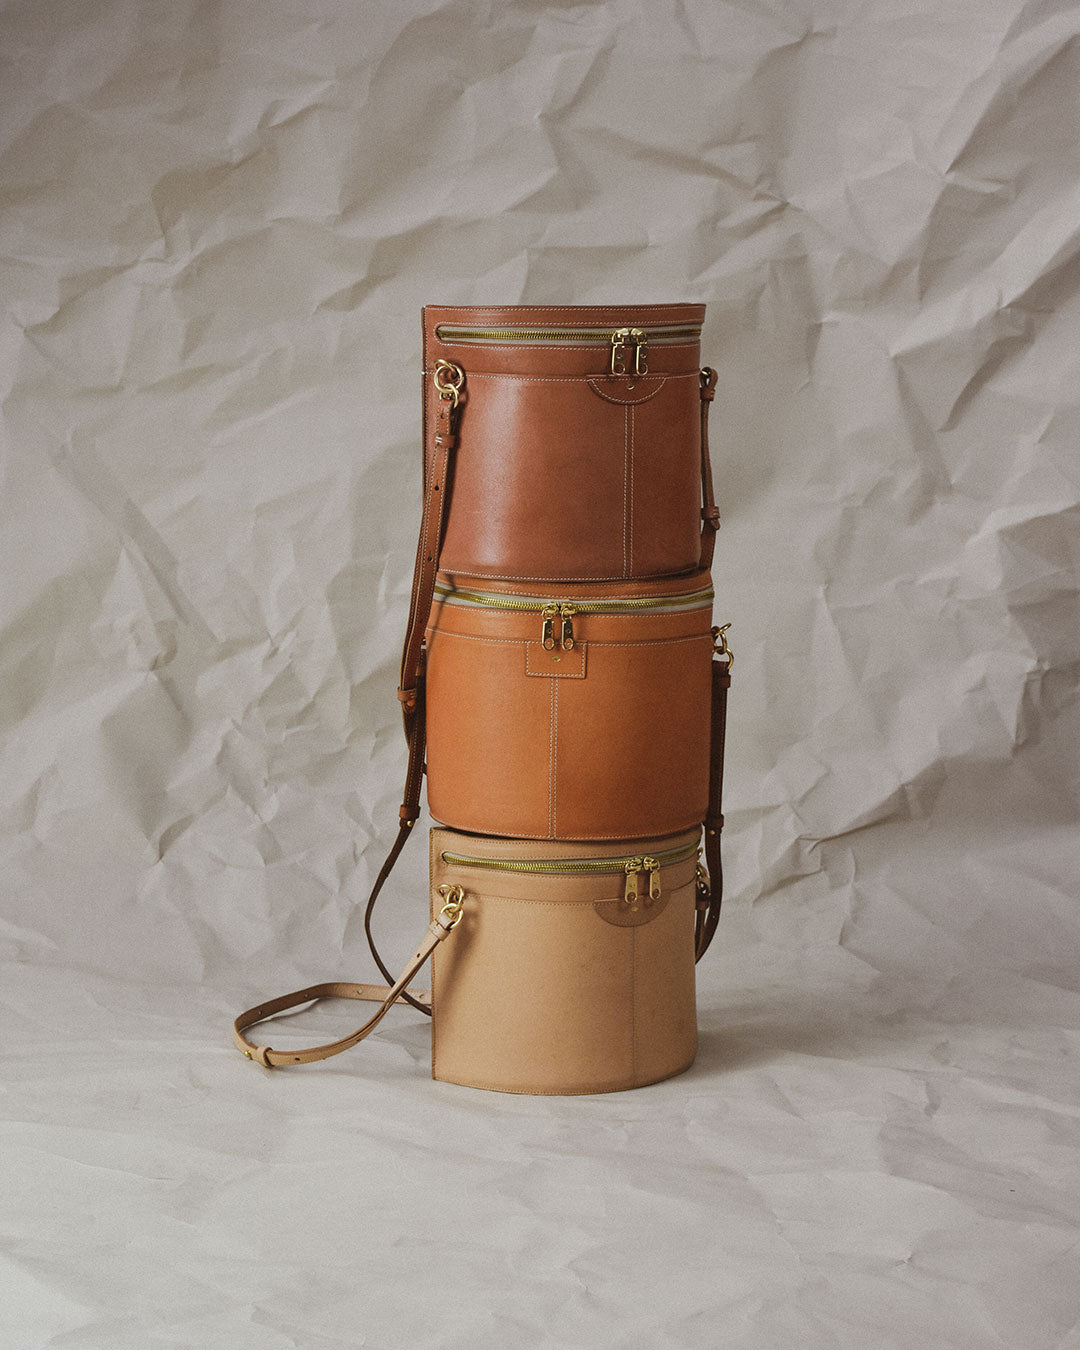 Three pastel coloured leather bucket bags are stacked on top of eachother. They are centered within the image, with moody lighting, and a crumpled paper background.